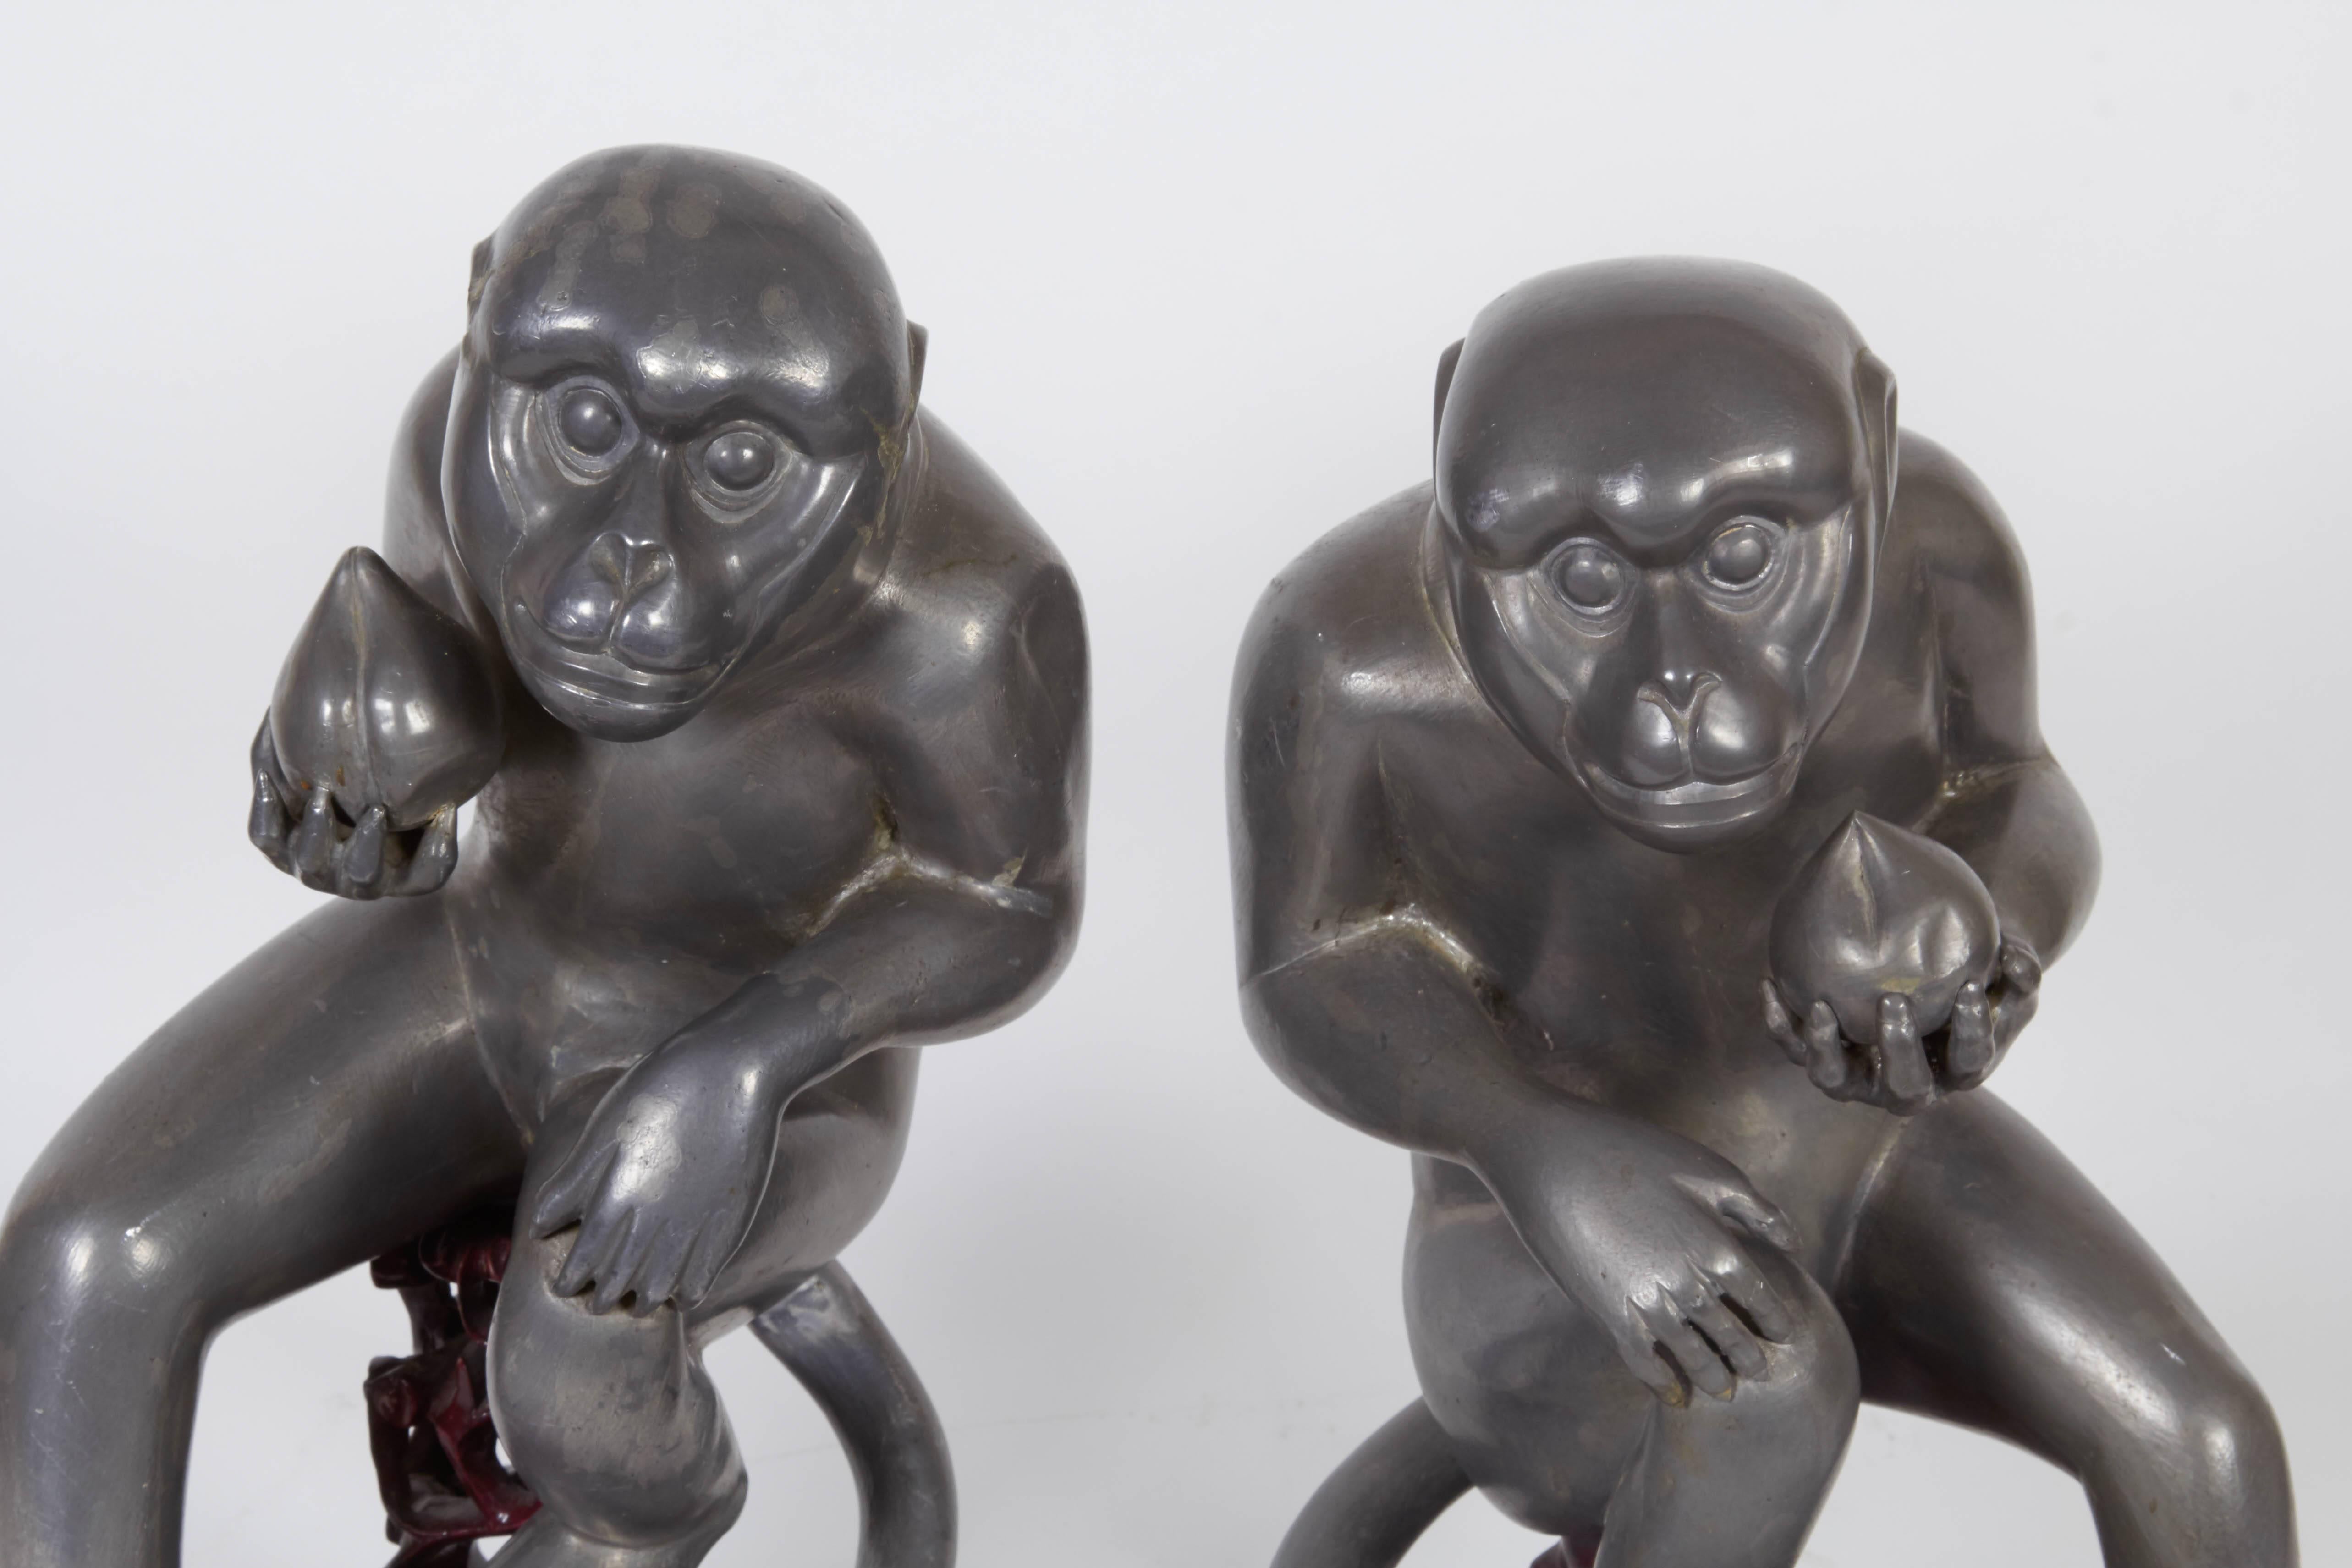 A pair of Chinese export monkey sculptures in pewter, produced circa late 19th century, obtained from the estate of Consuelo Vanderbilt, each depicted holding a peach of immortality, on carved wood stands. Very good antique condition, one monkey